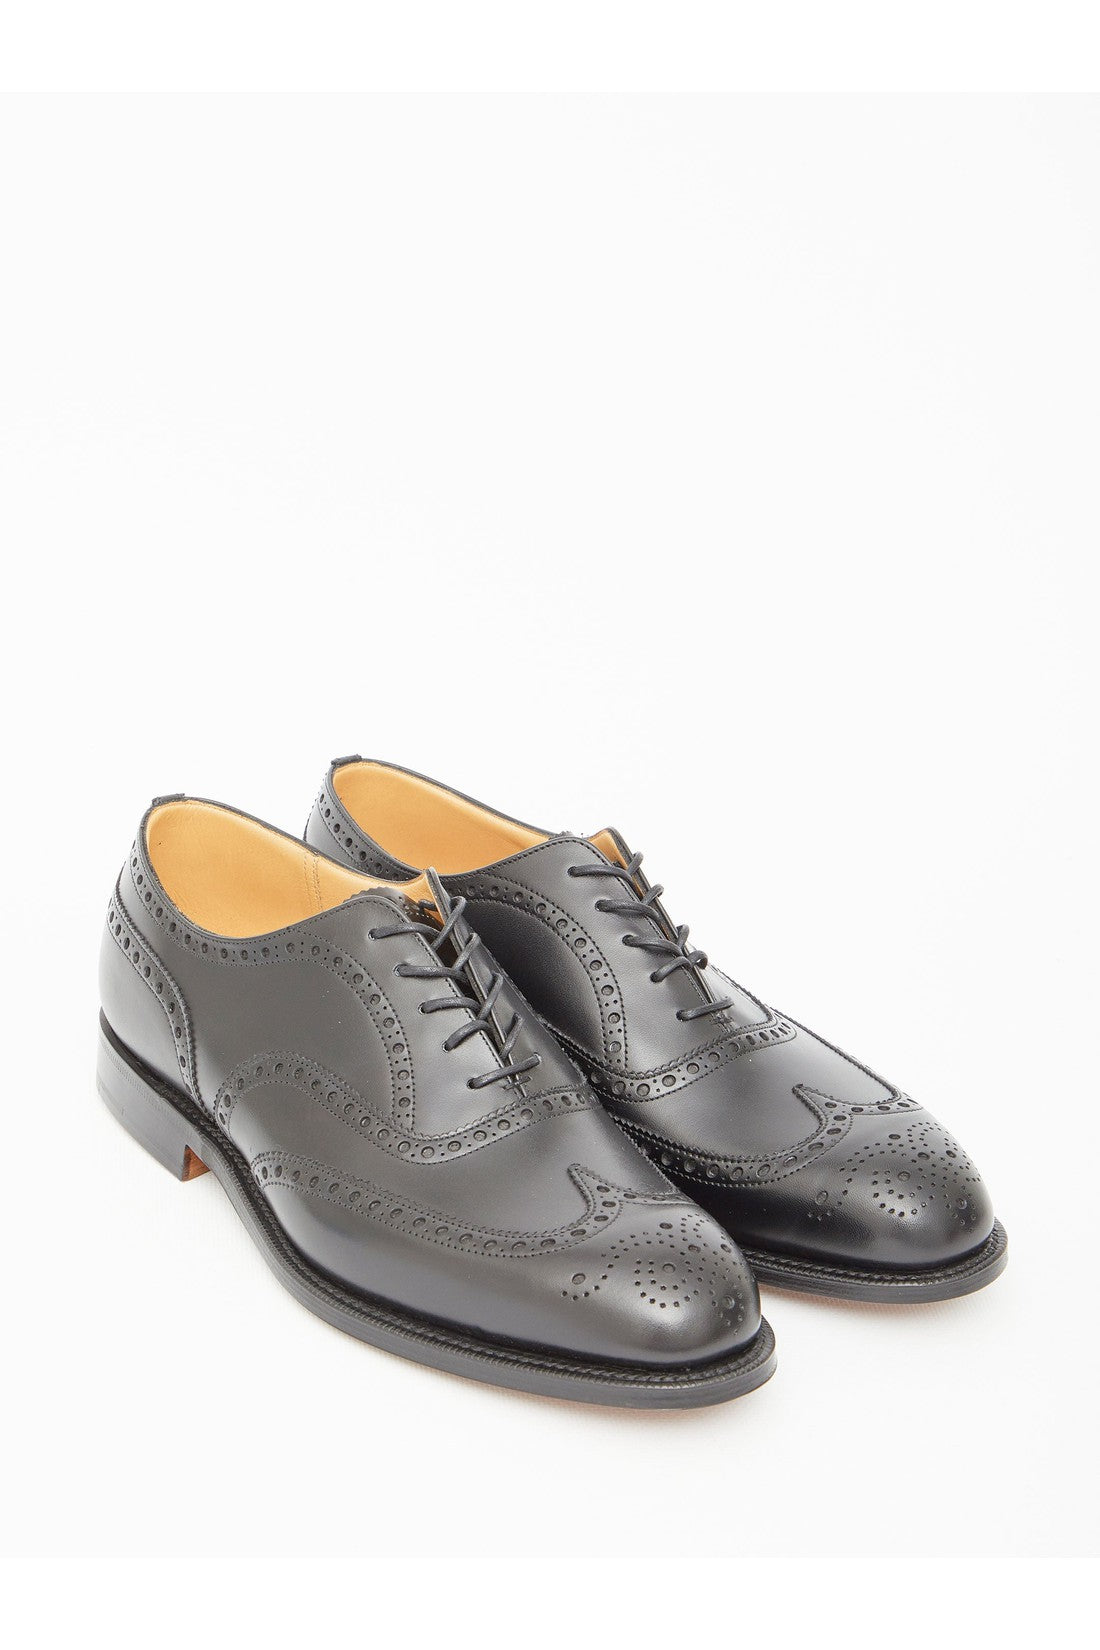 Chetwynd Oxford shoes